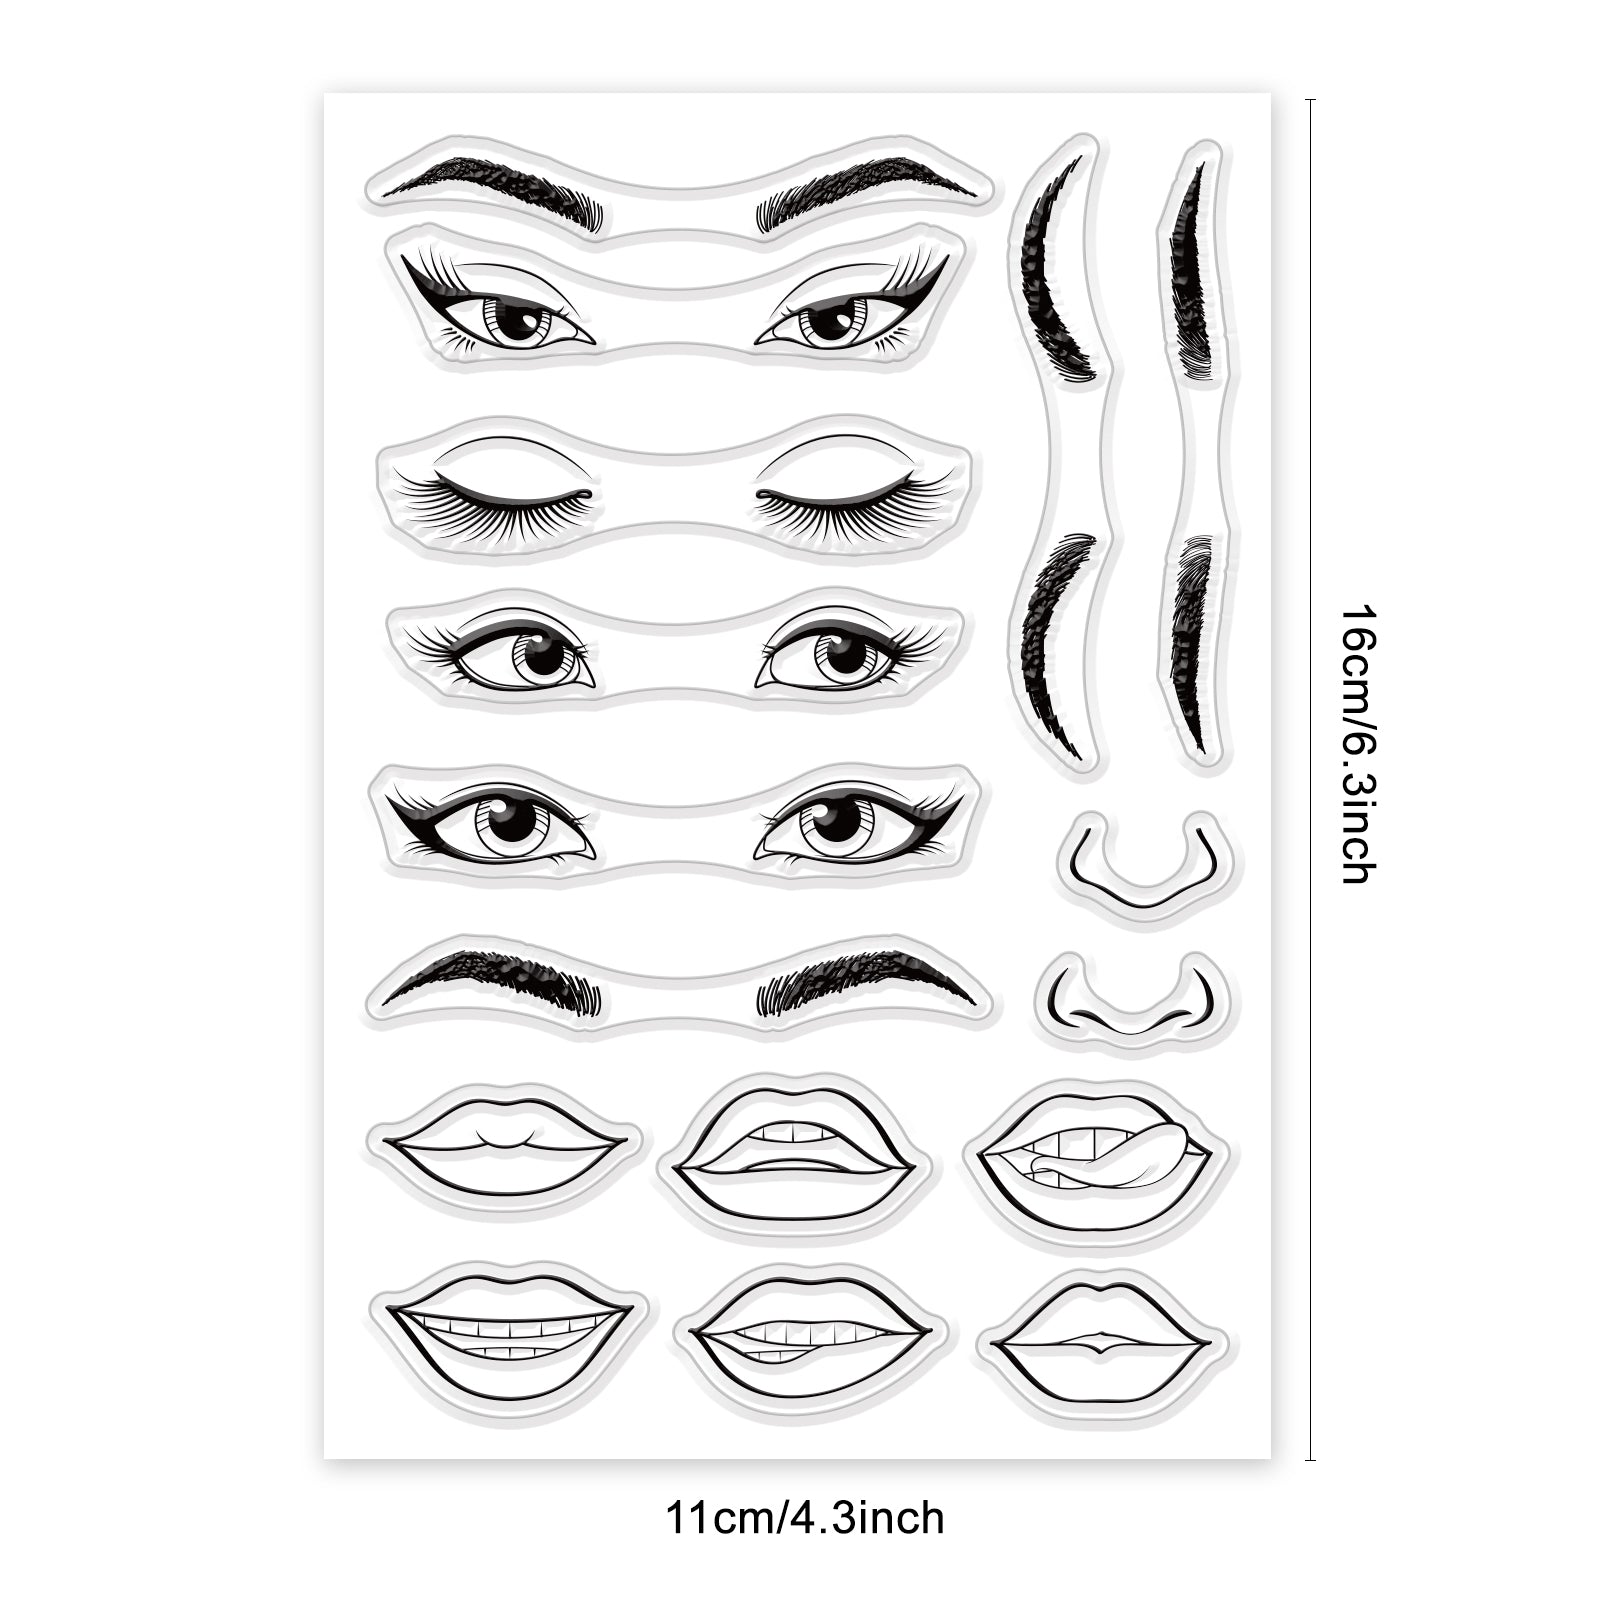 Globleland Five Senses Eye Eyebrow Lips Nose Clear Silicone Stamp Seal for Card Making Decoration and DIY Scrapbooking